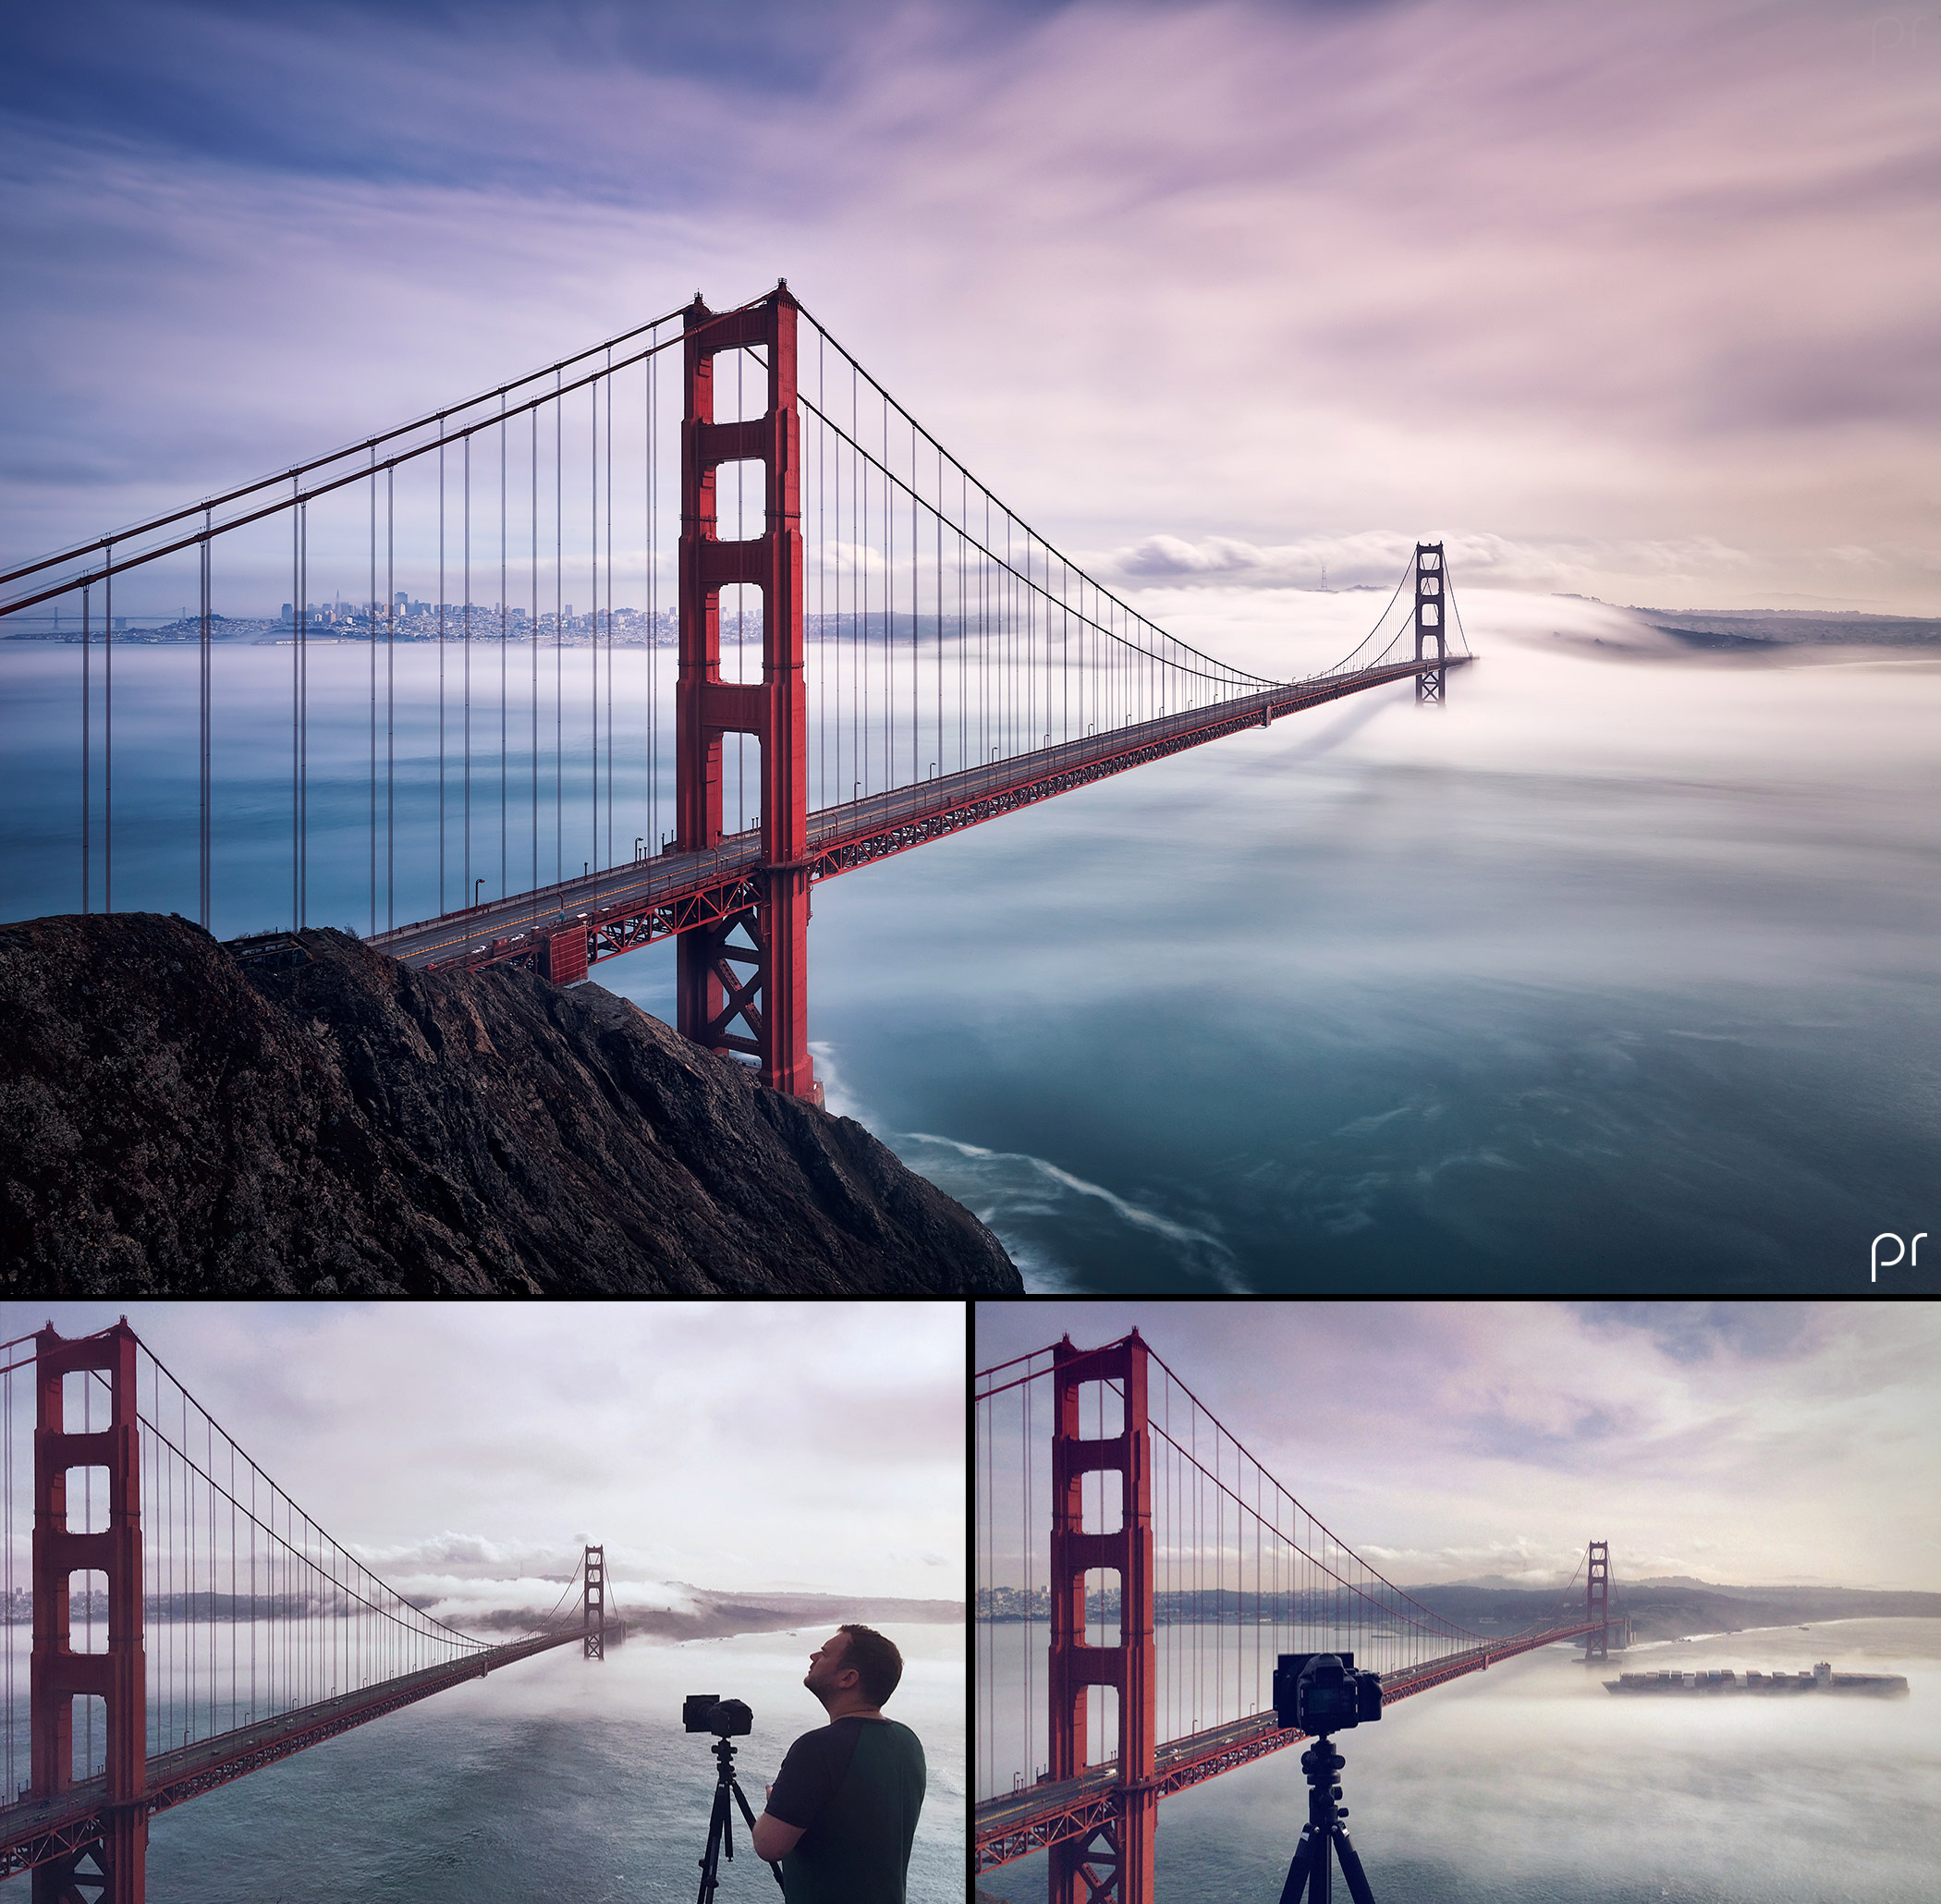 How to see Golden Gate Bridge without fog?